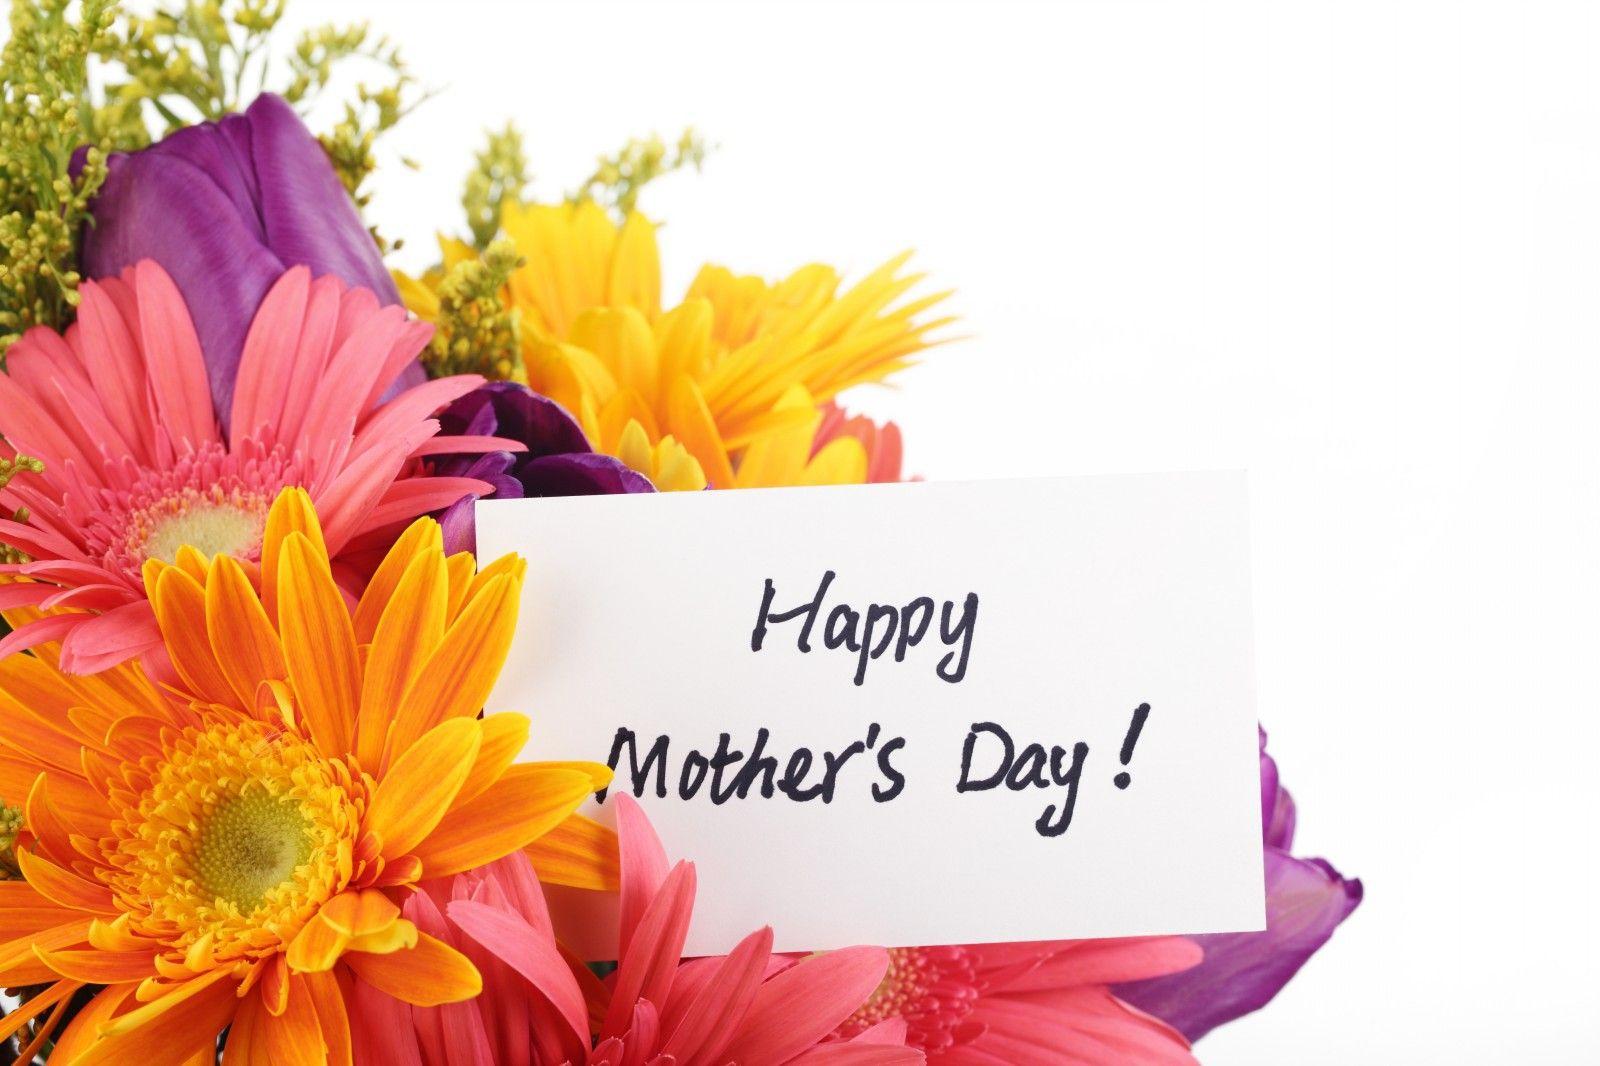 Happy Mothers Day Image Photo HD Background Wallpaper